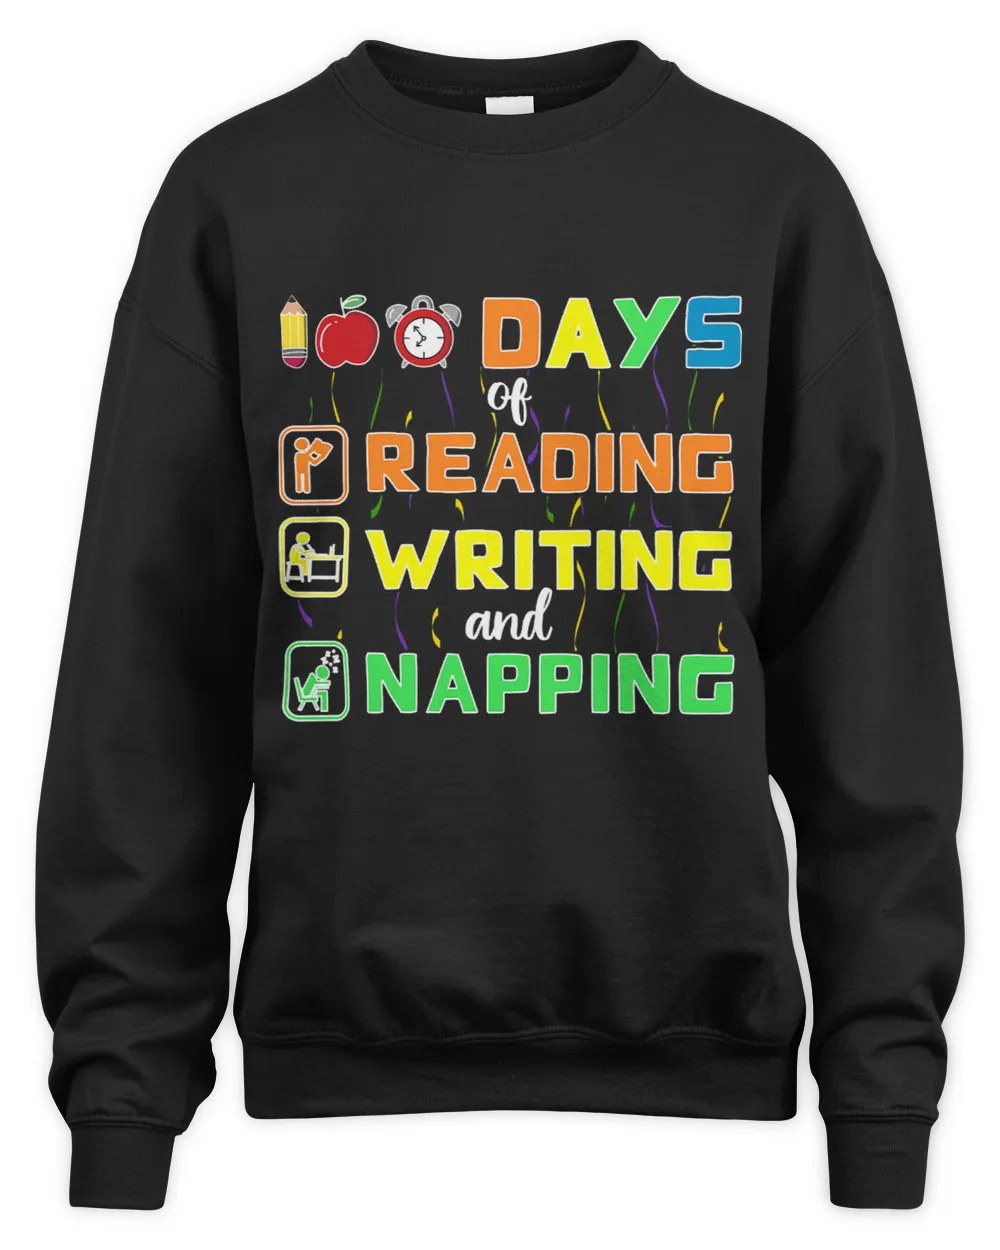 100 Days of Reading Writing 2Napping 2100 Days of School